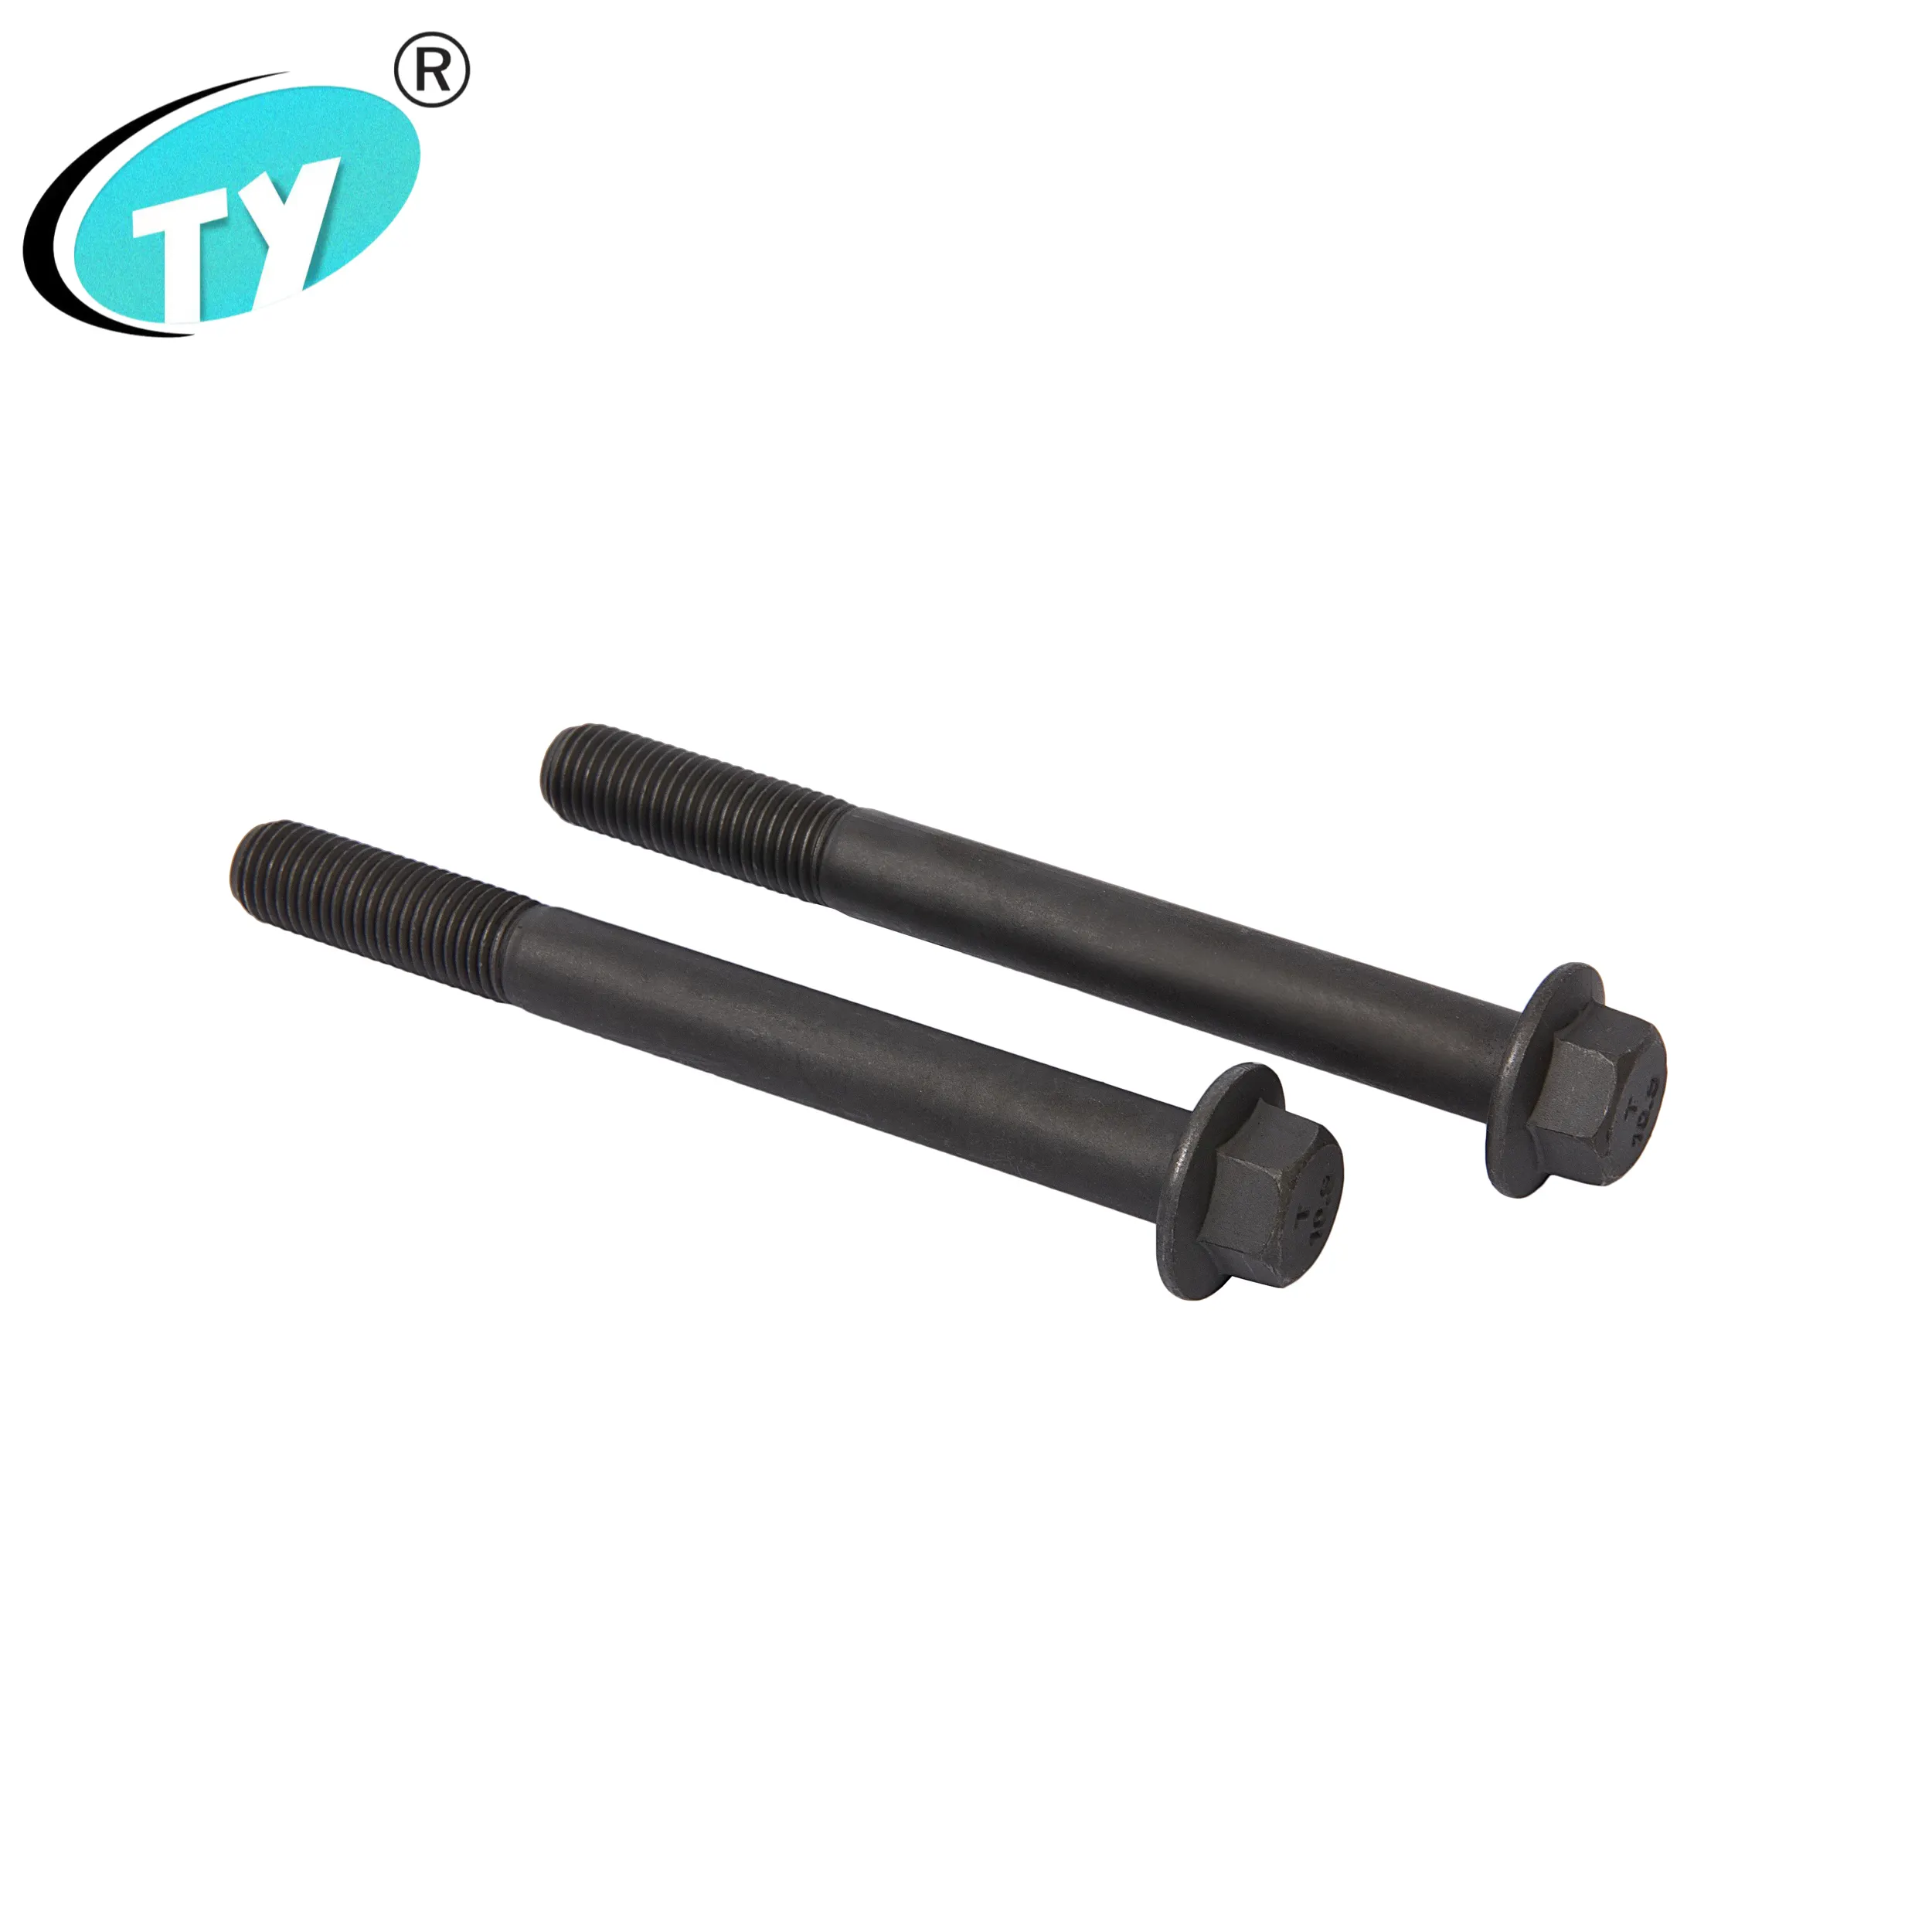 Factory supply Scm435 M10 100mm Car connection fasteners Semi-threaded flange hexagonal long bolts